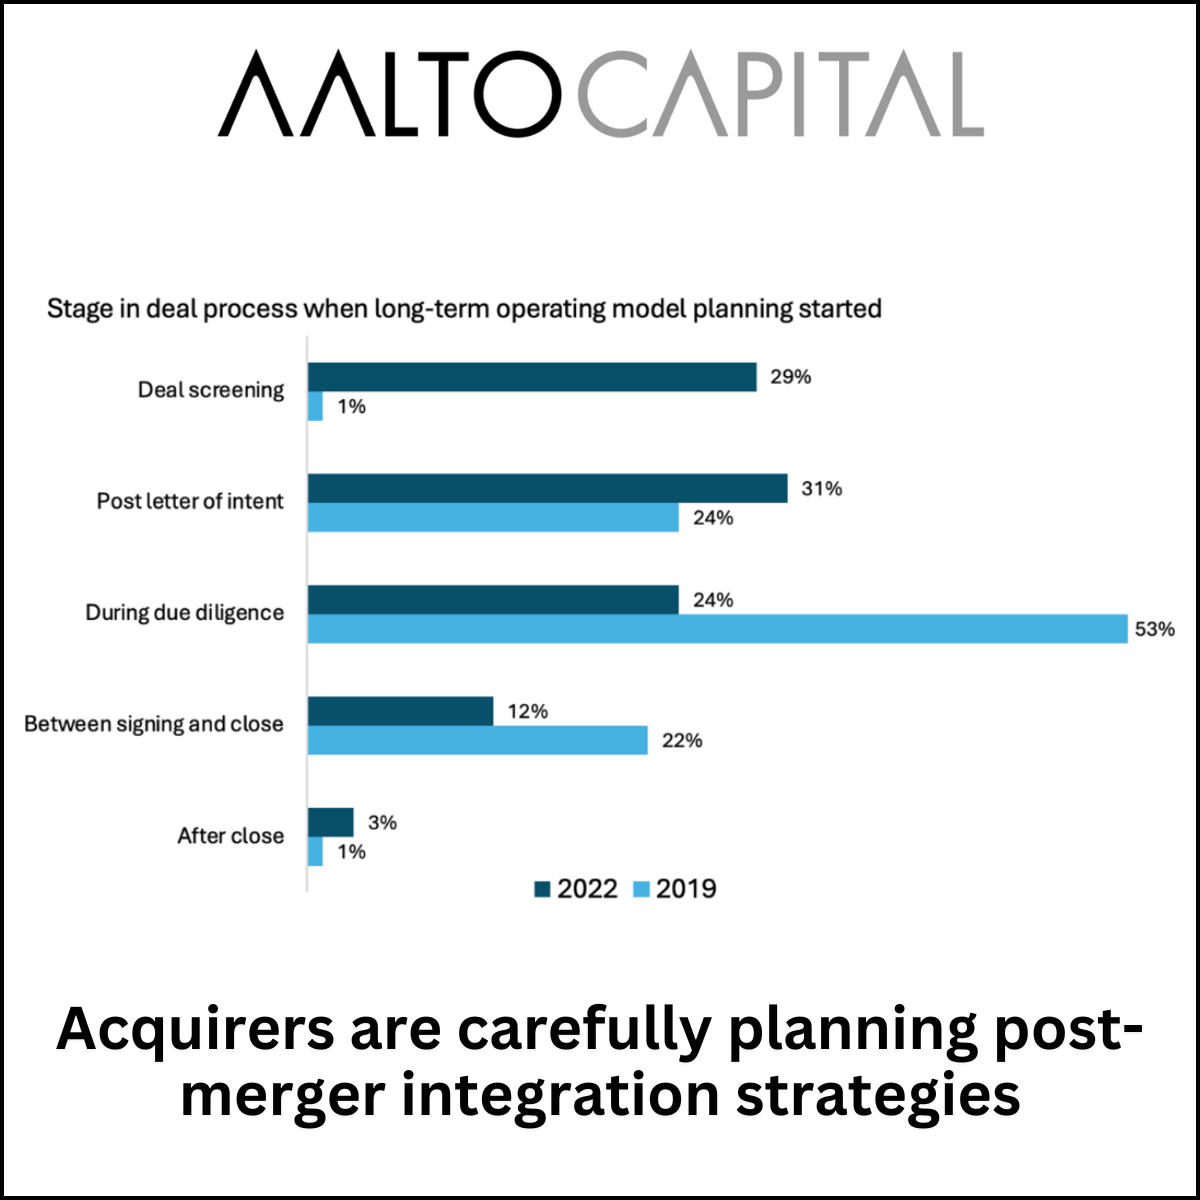 Acquirers are carefully planning post-merger integration strategies